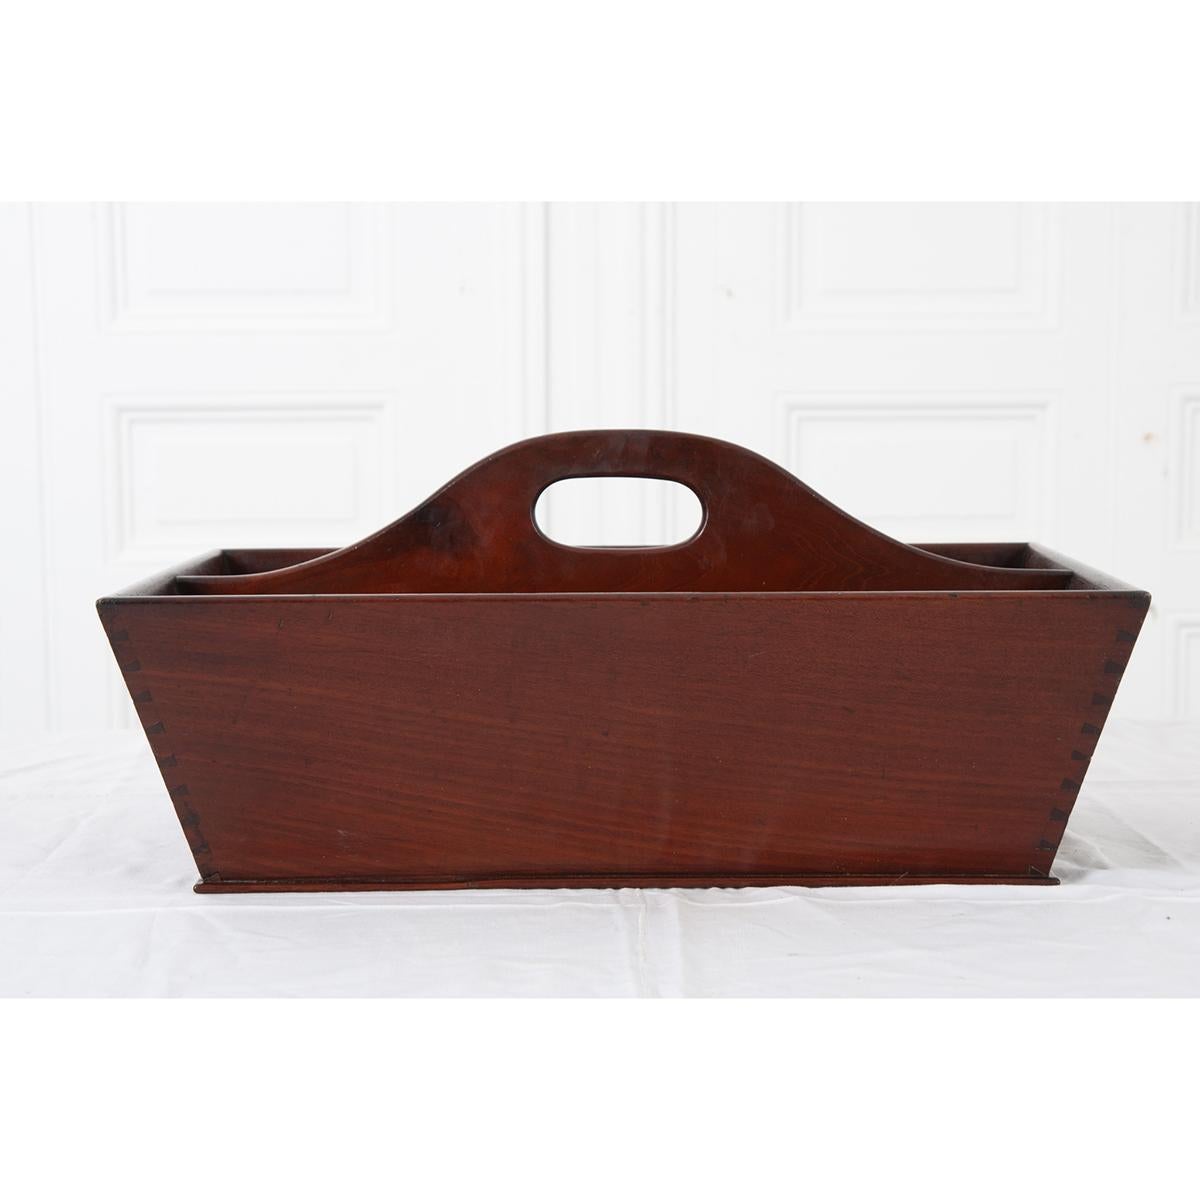 A handsome means of carrying your supplies, this outstanding mahogany tray was made in England, circa 1820. Note the antique’s stylish design and near-perfectly executed dove-tailed corners! A hole found in the center divider provides a handle to